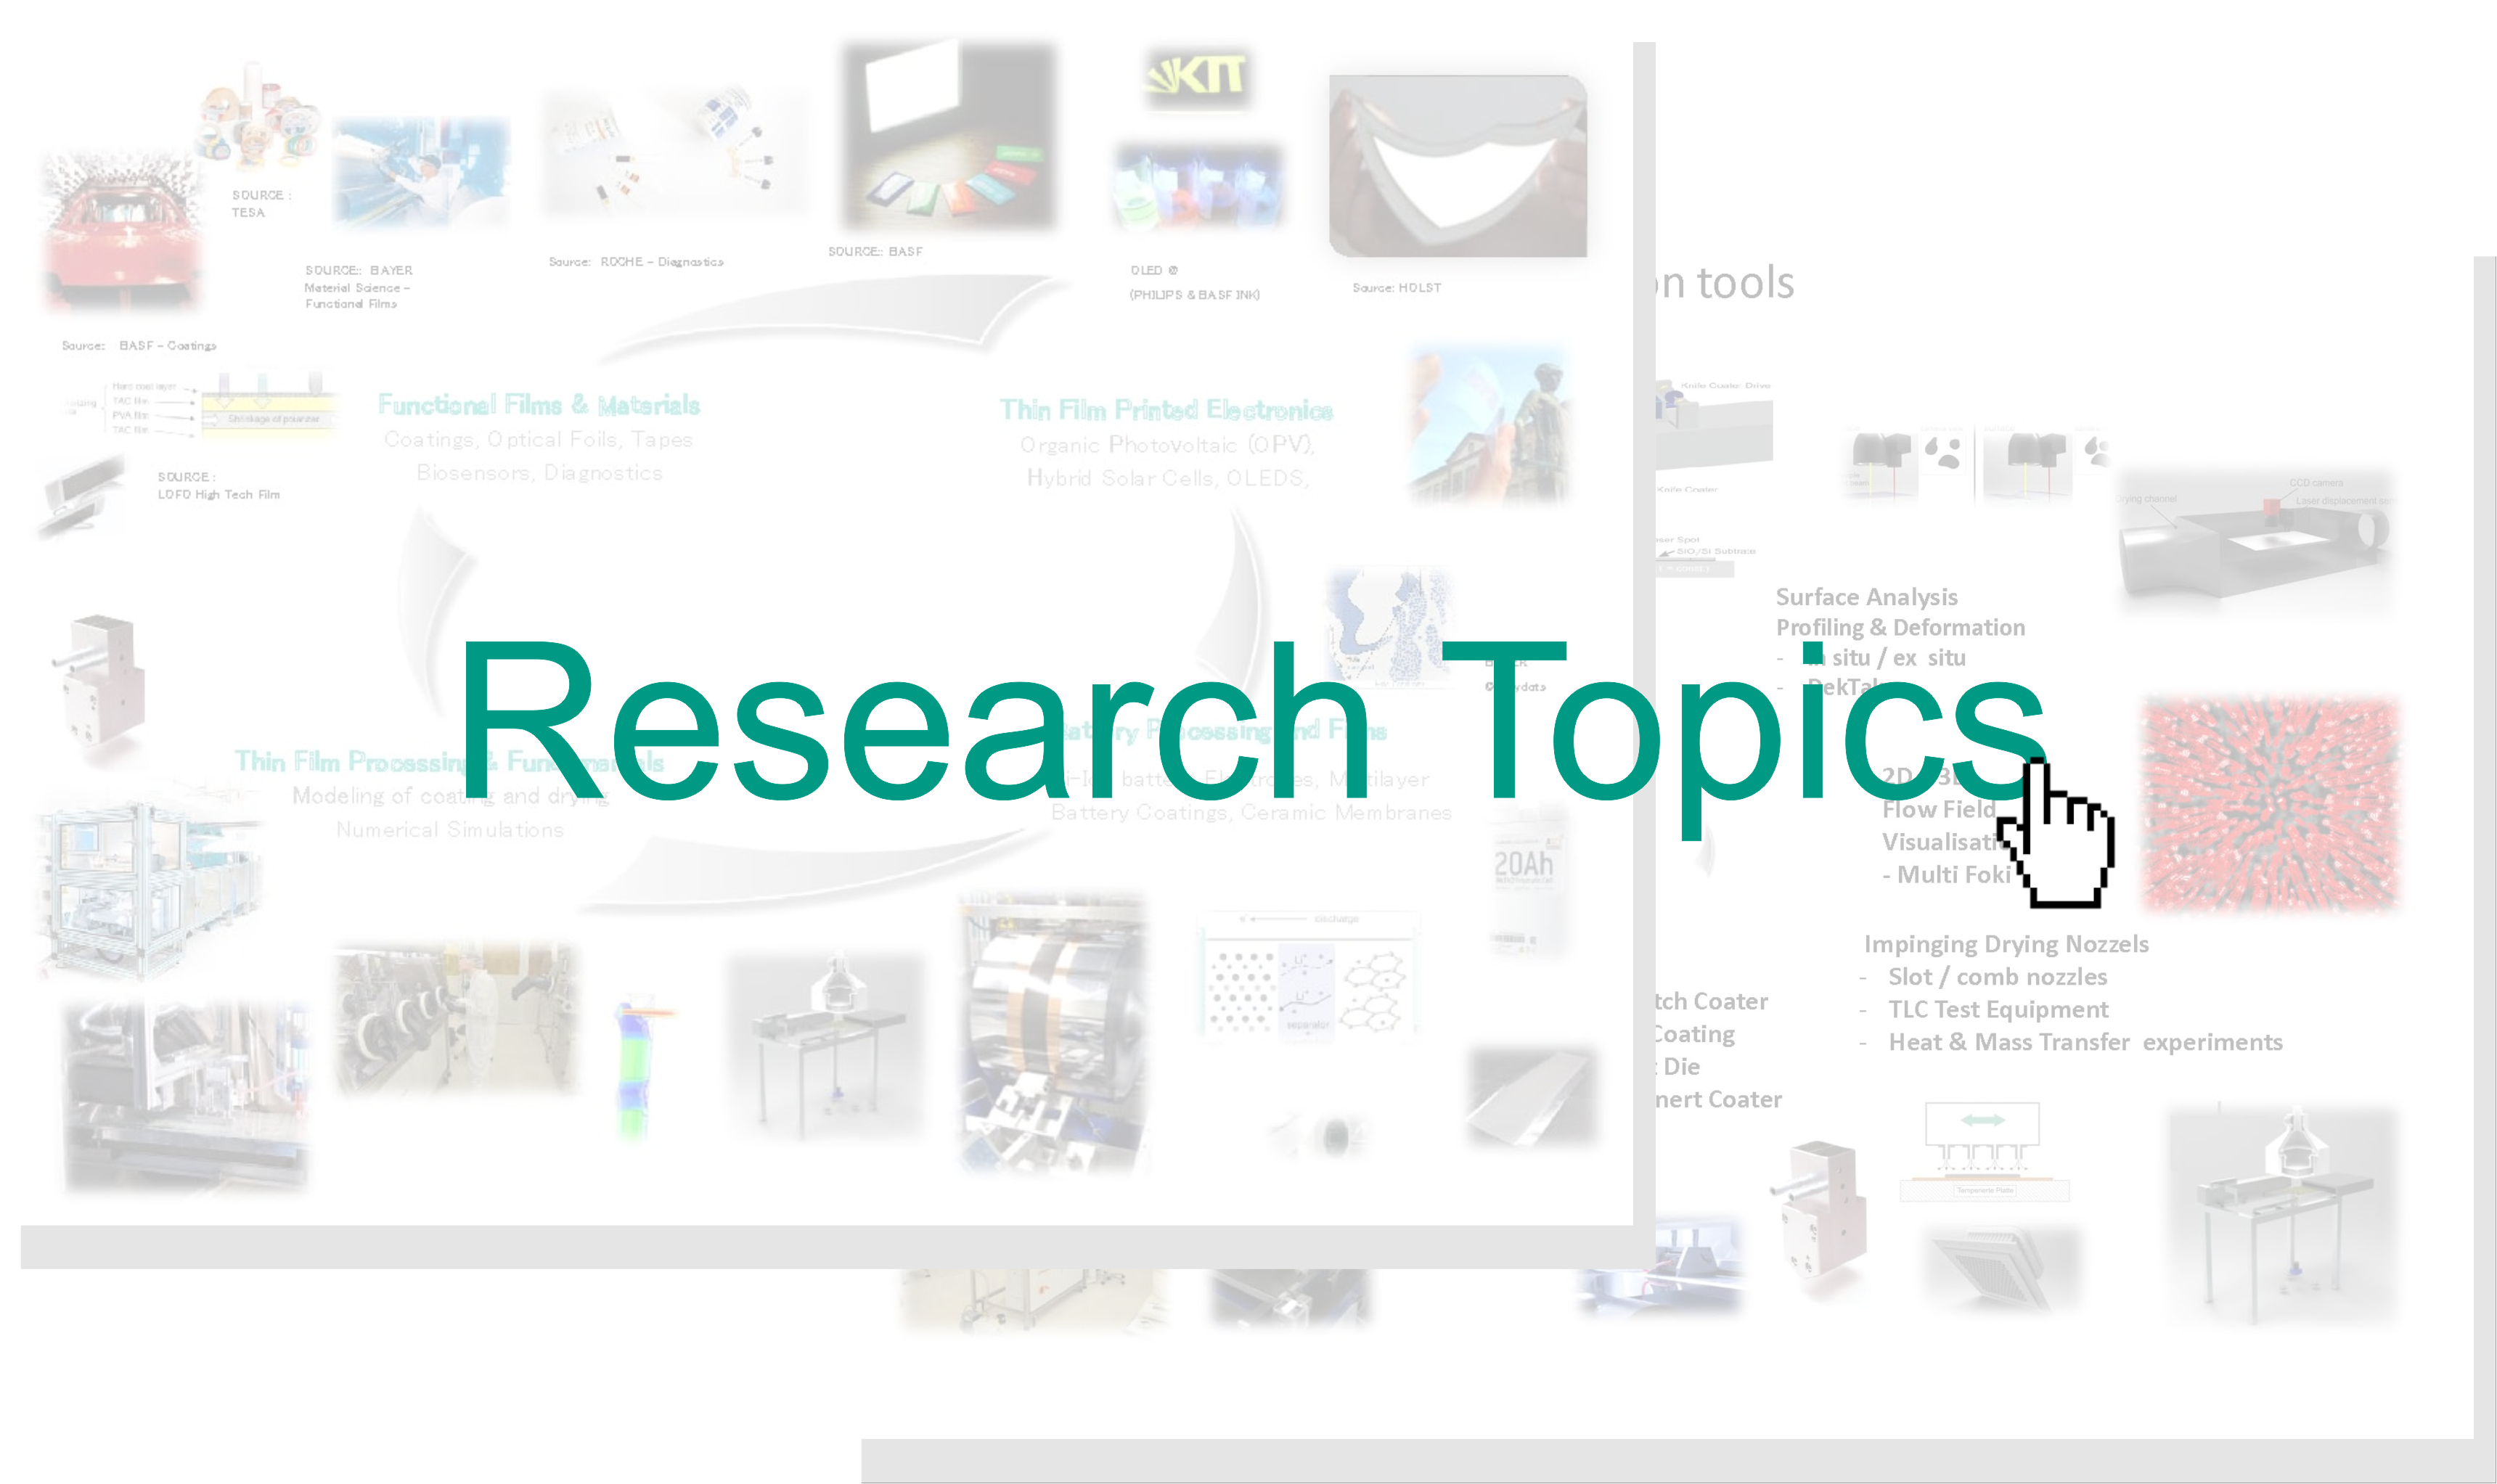 2014-09-02-Research-Topics-banner.png